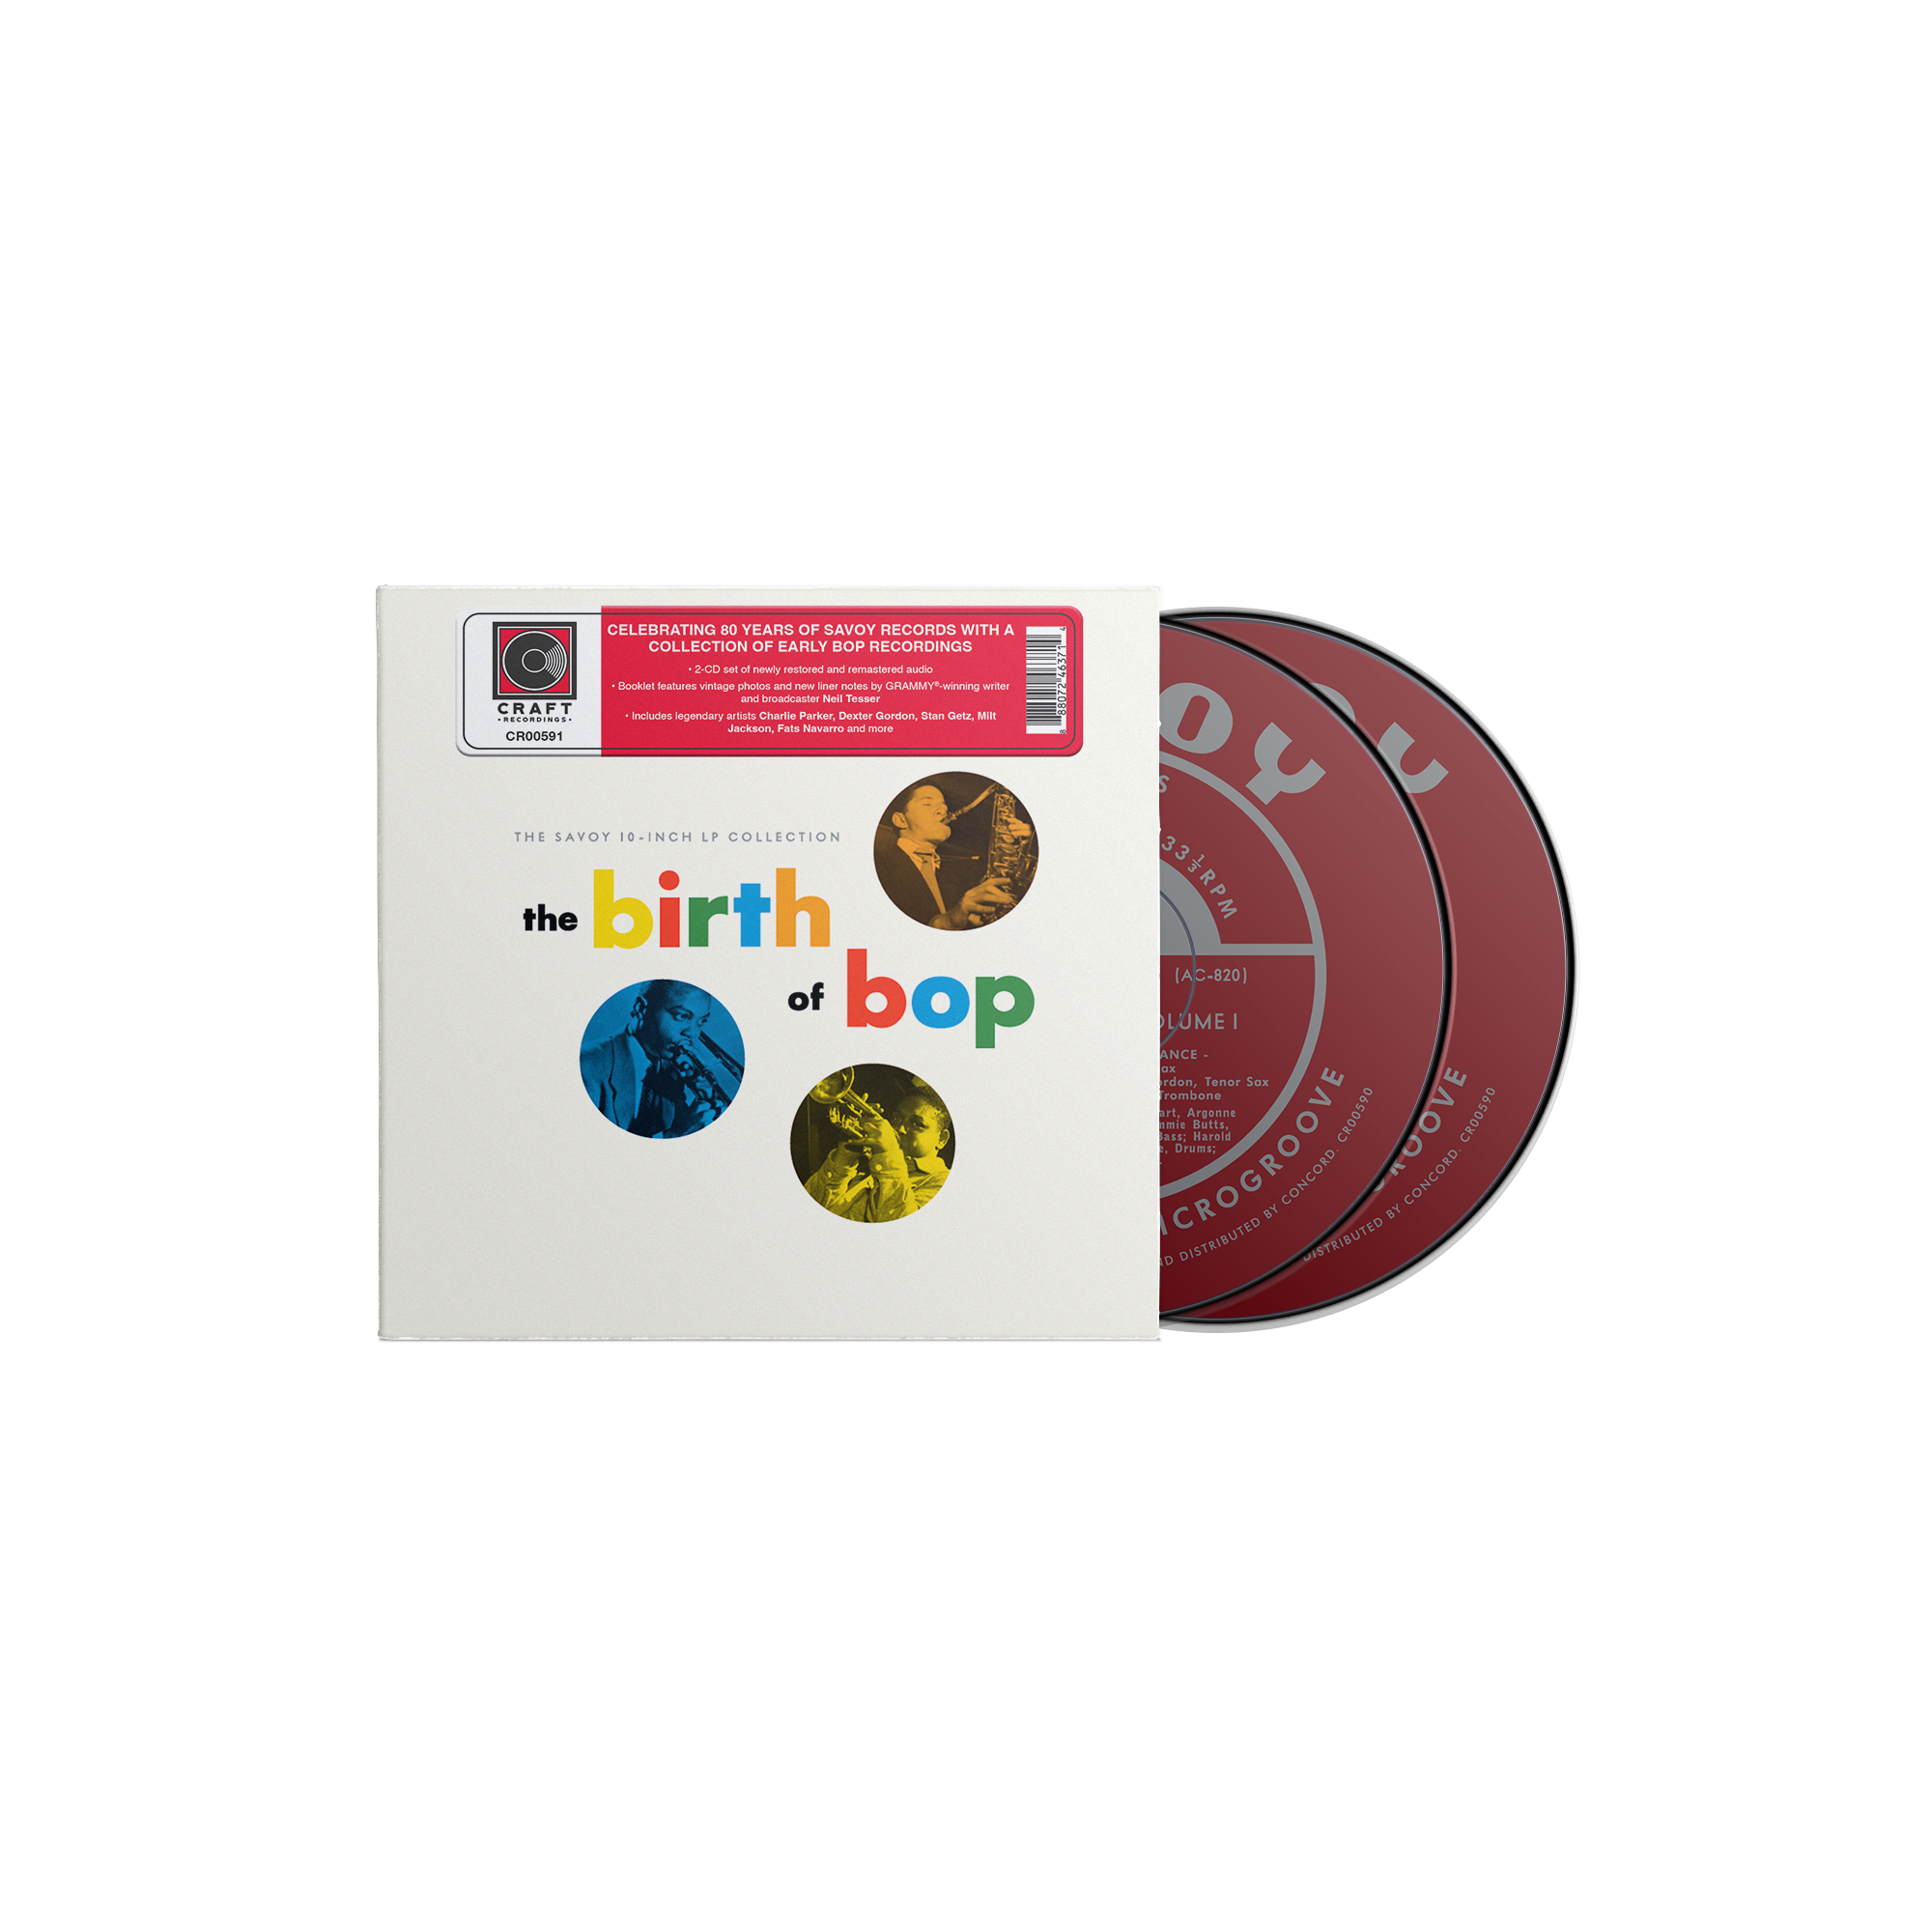 The Birth Of Bop: The Savoy 10-Inch LP Collection (2-CD)